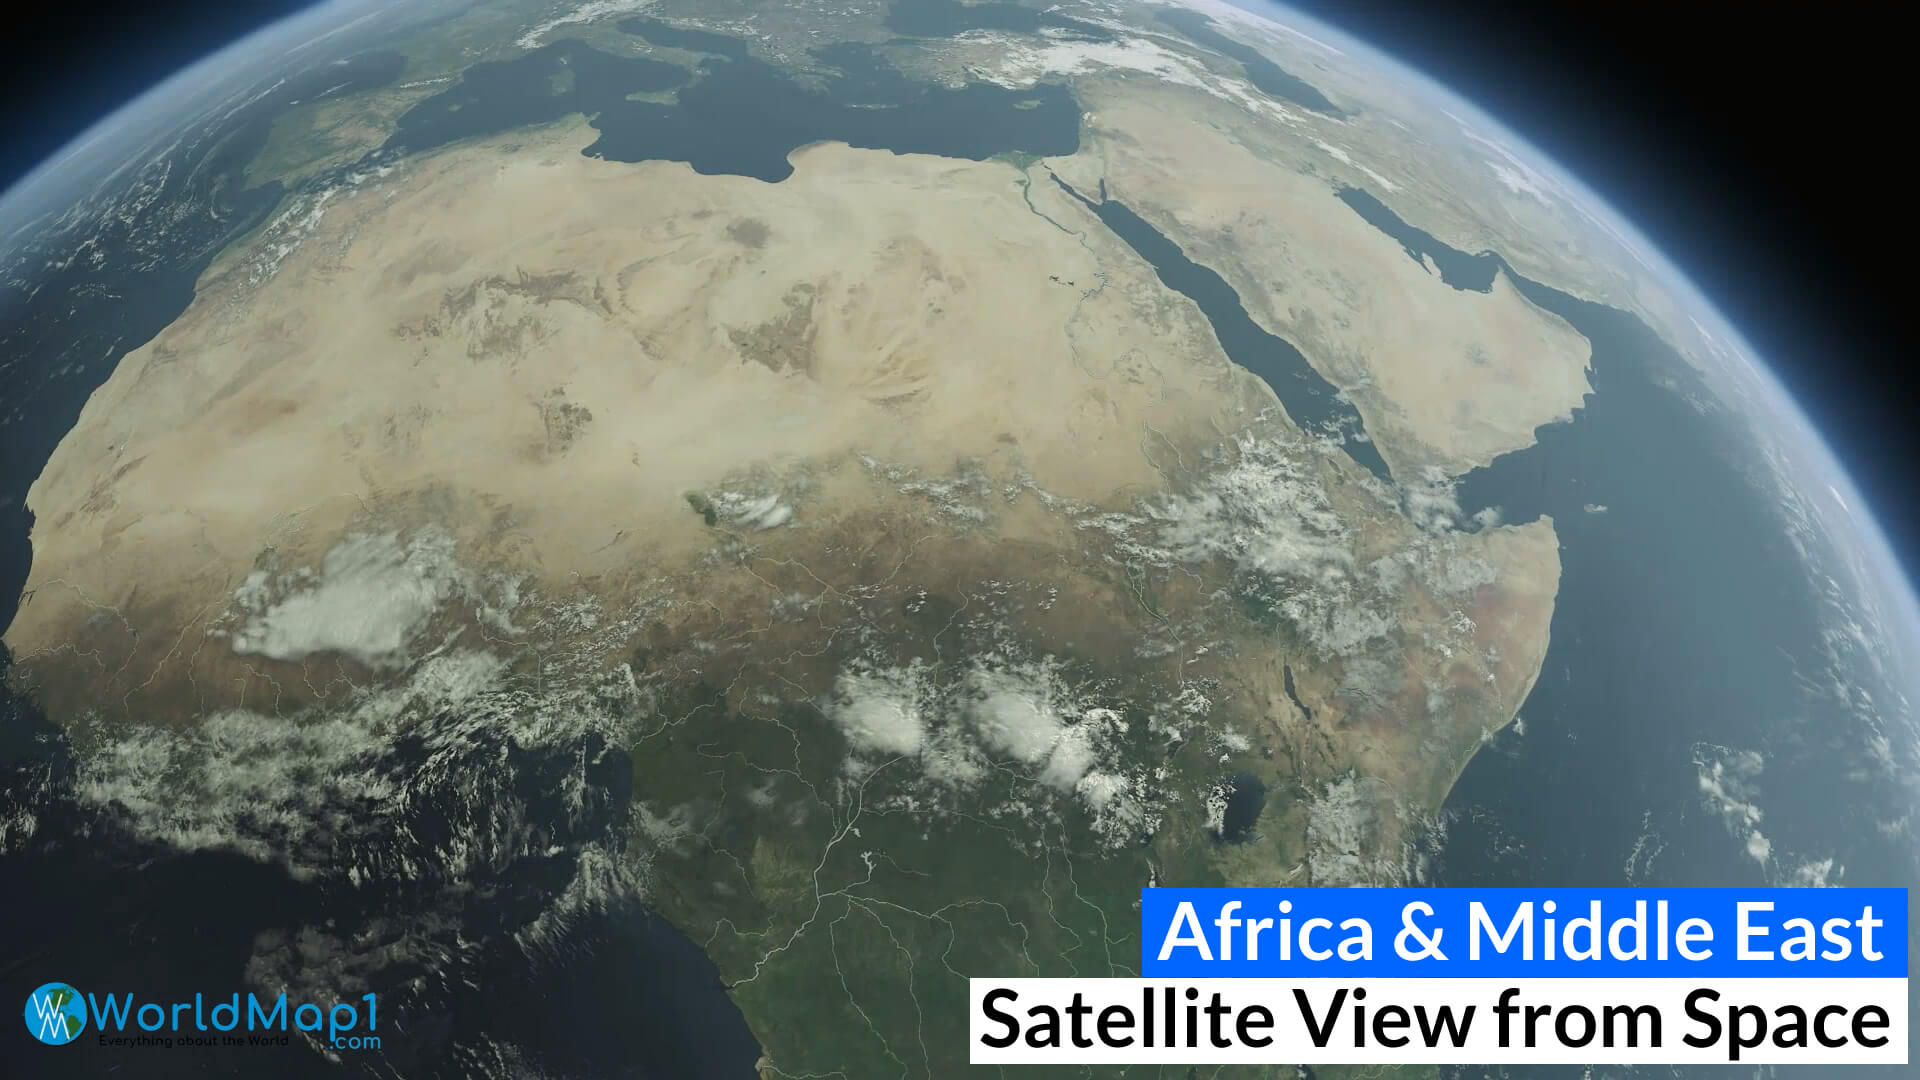 Africa and Middle East Satellite View